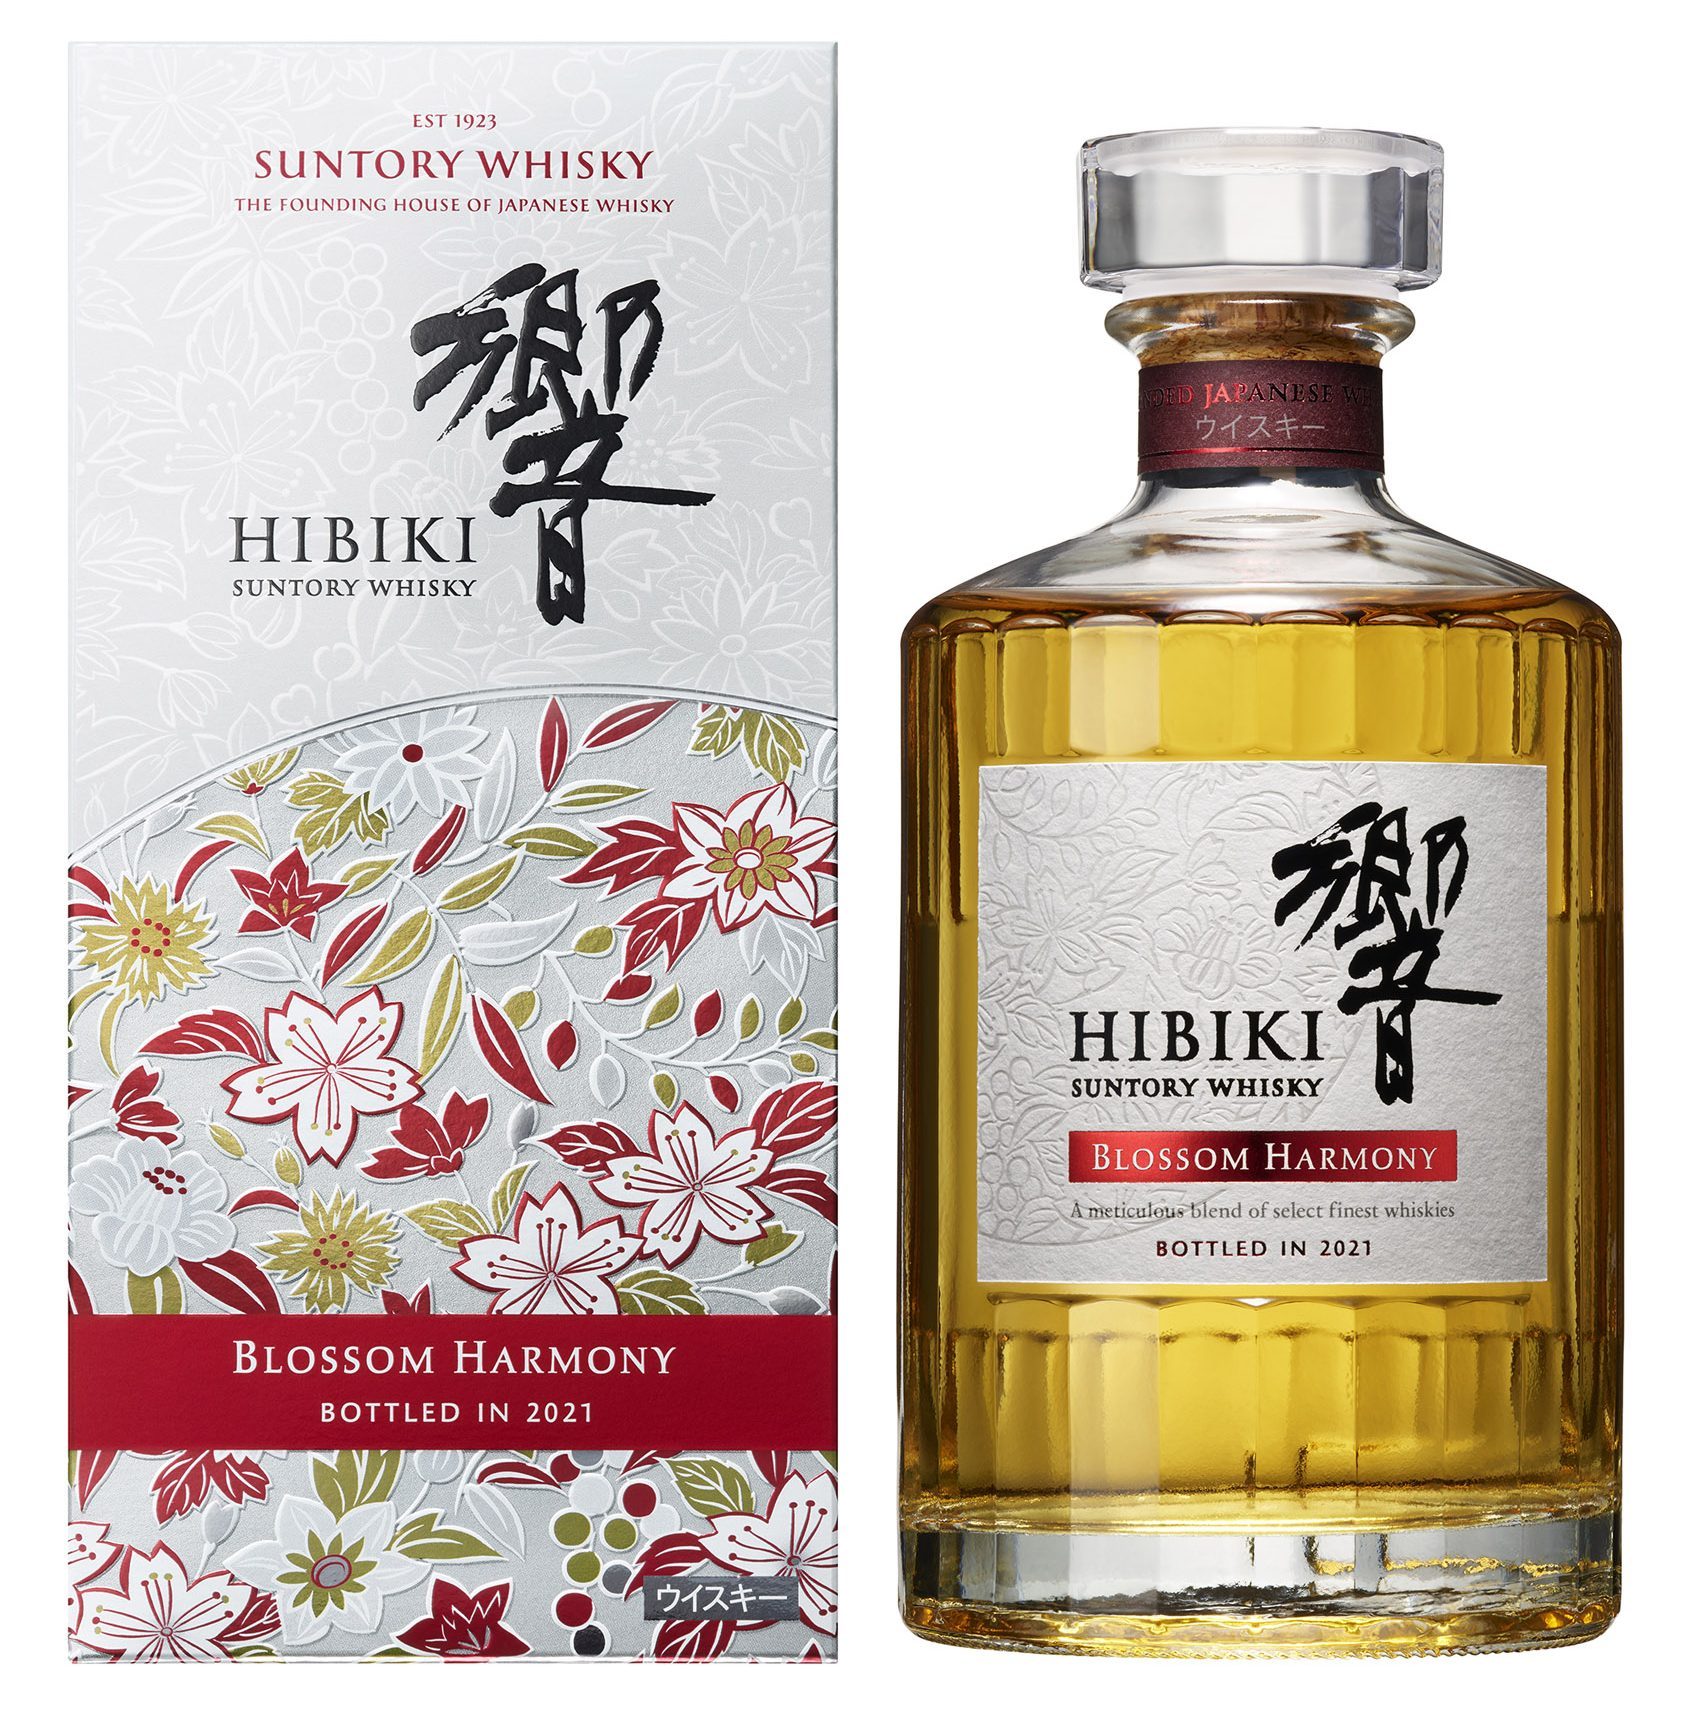 Blossom Harmony Hibiki is Japan’s newest musttry whisky SoraNews24